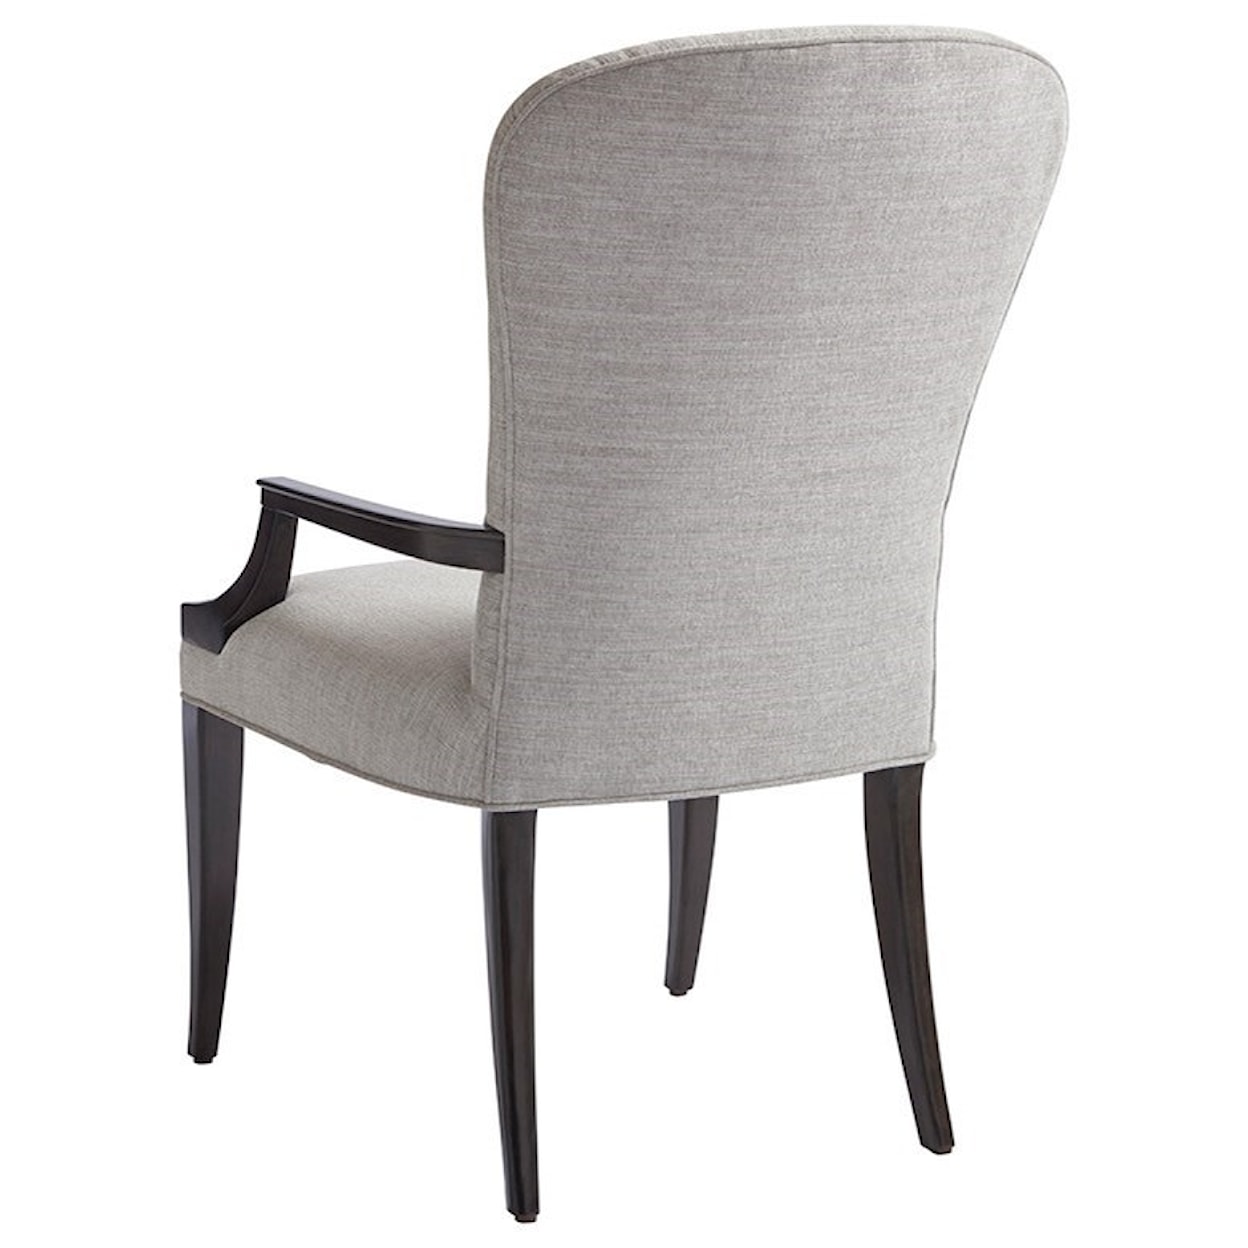 Barclay Butera Brentwood Schuler Upholstered Arm Chair (married)